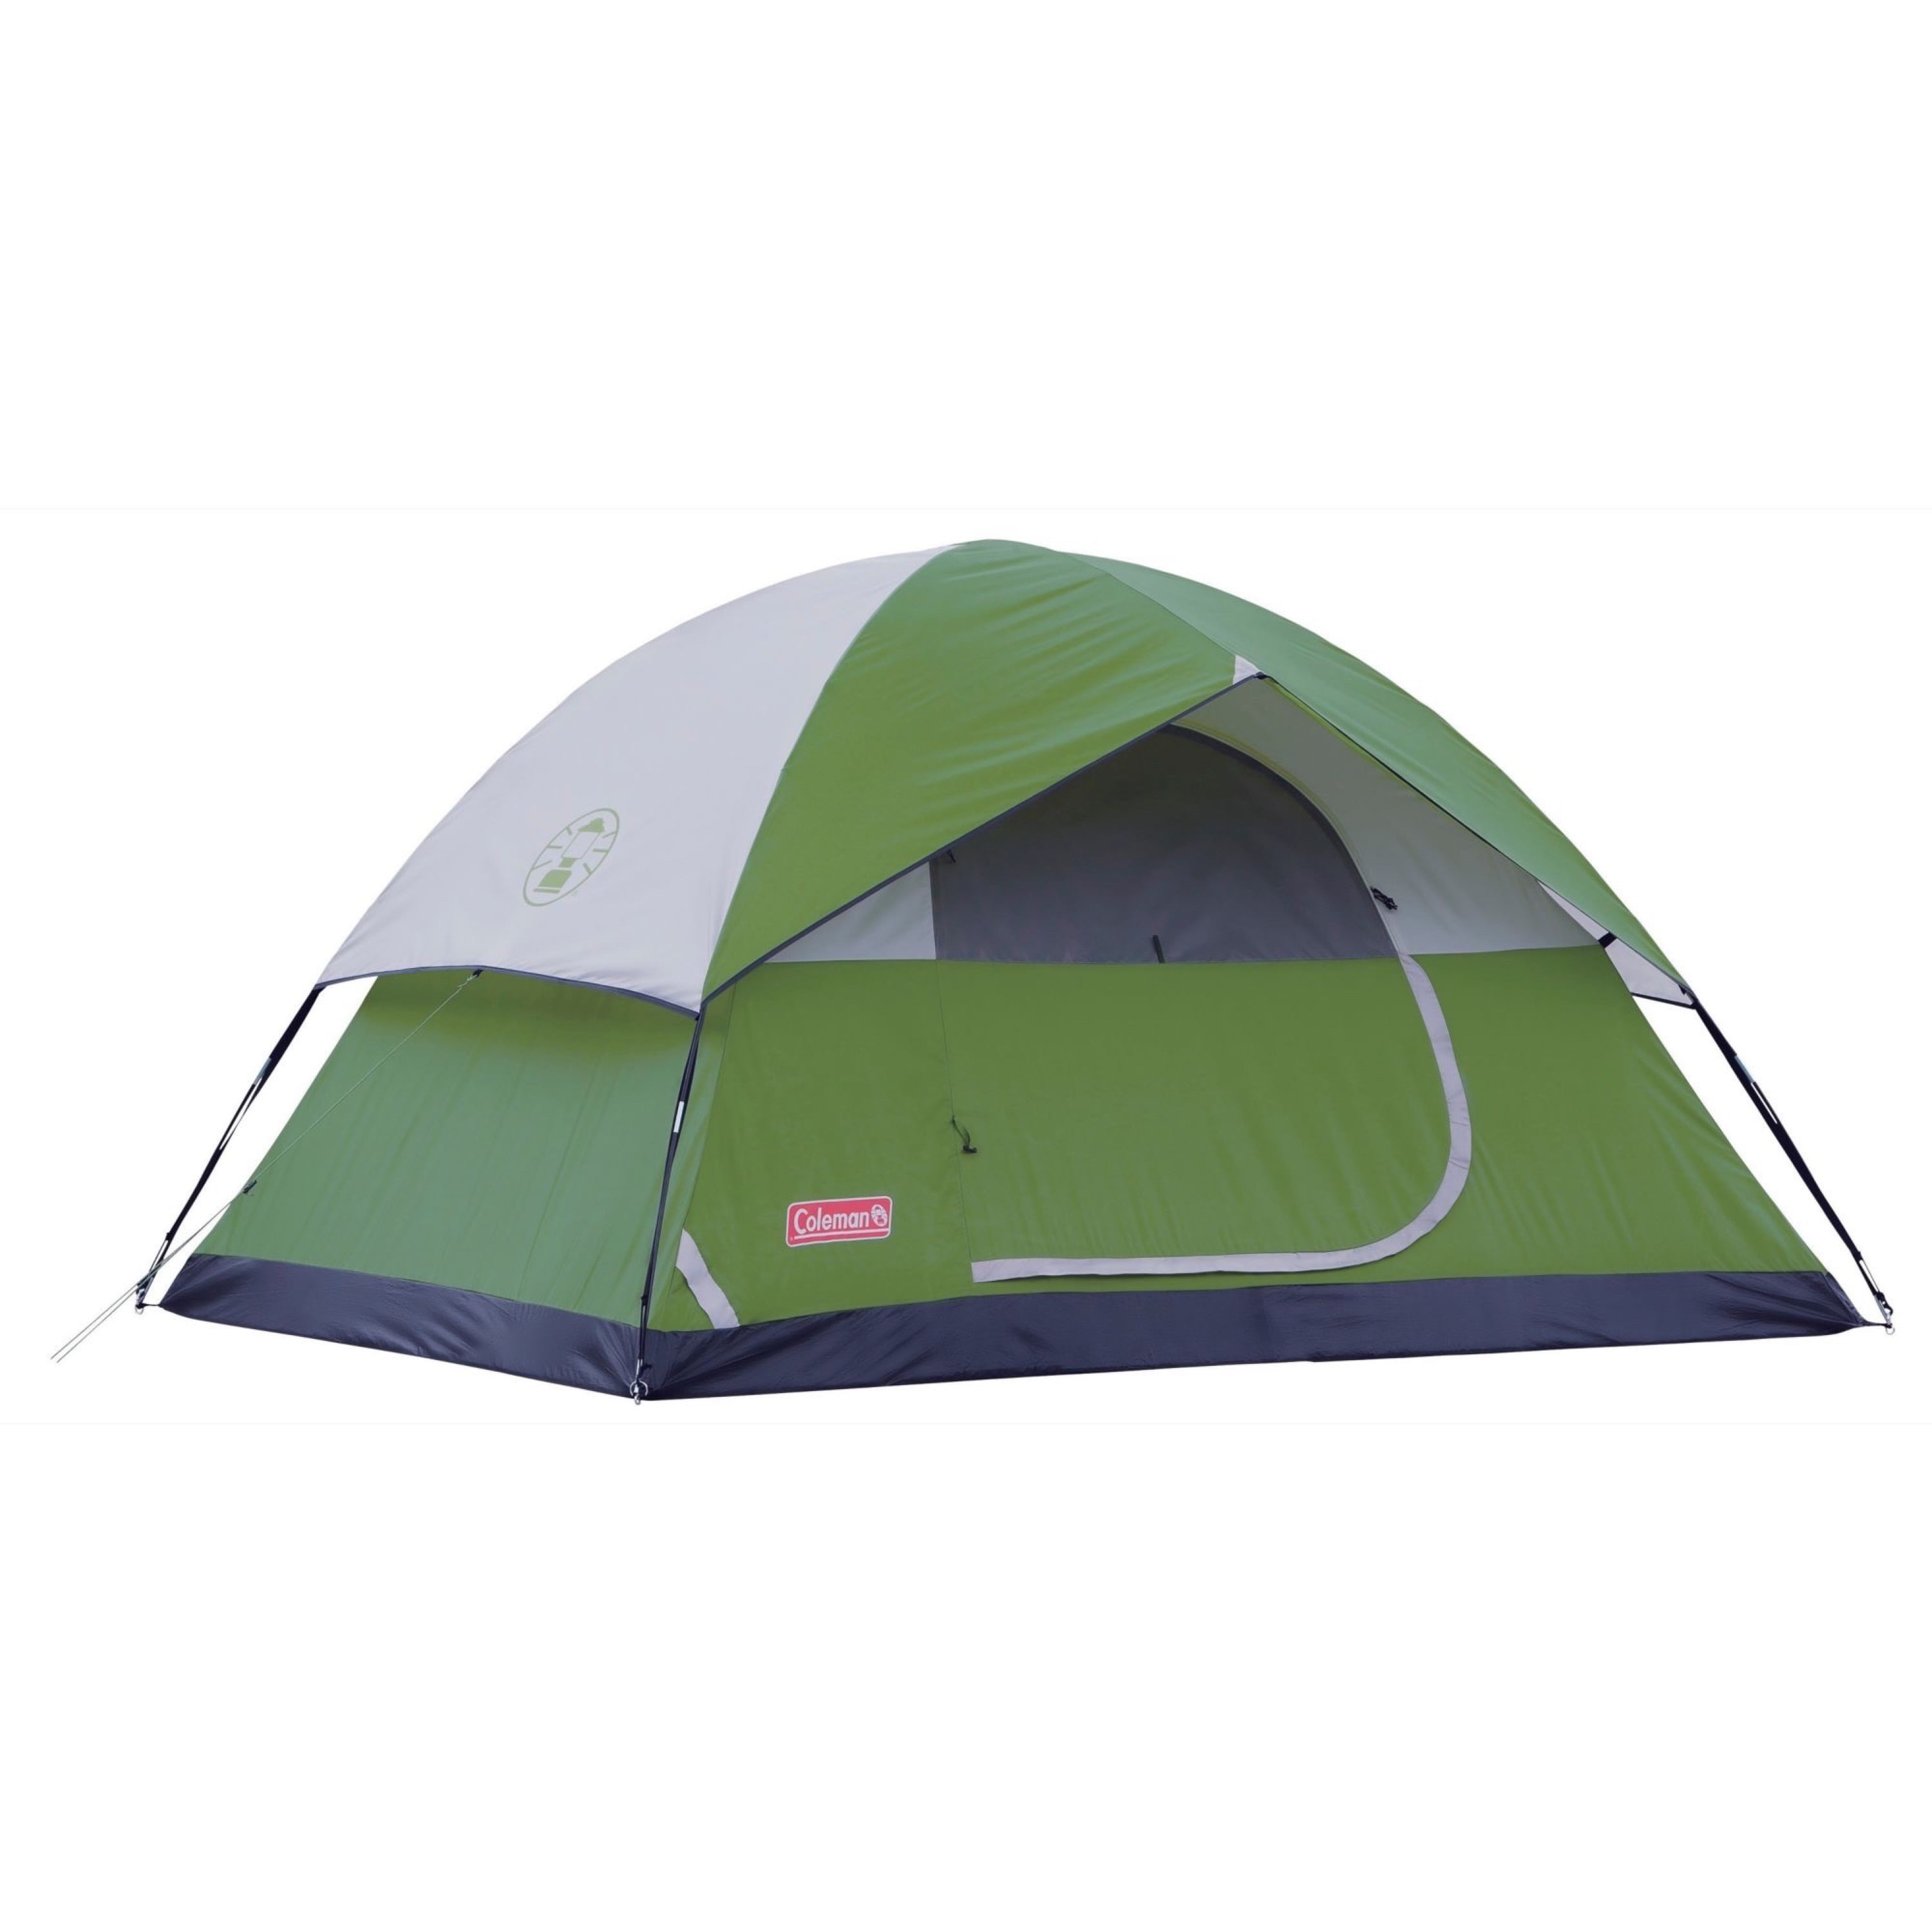 4-Person Coleman Sundome Camping Tent (Green, 1 room) $69 + Free Shipping